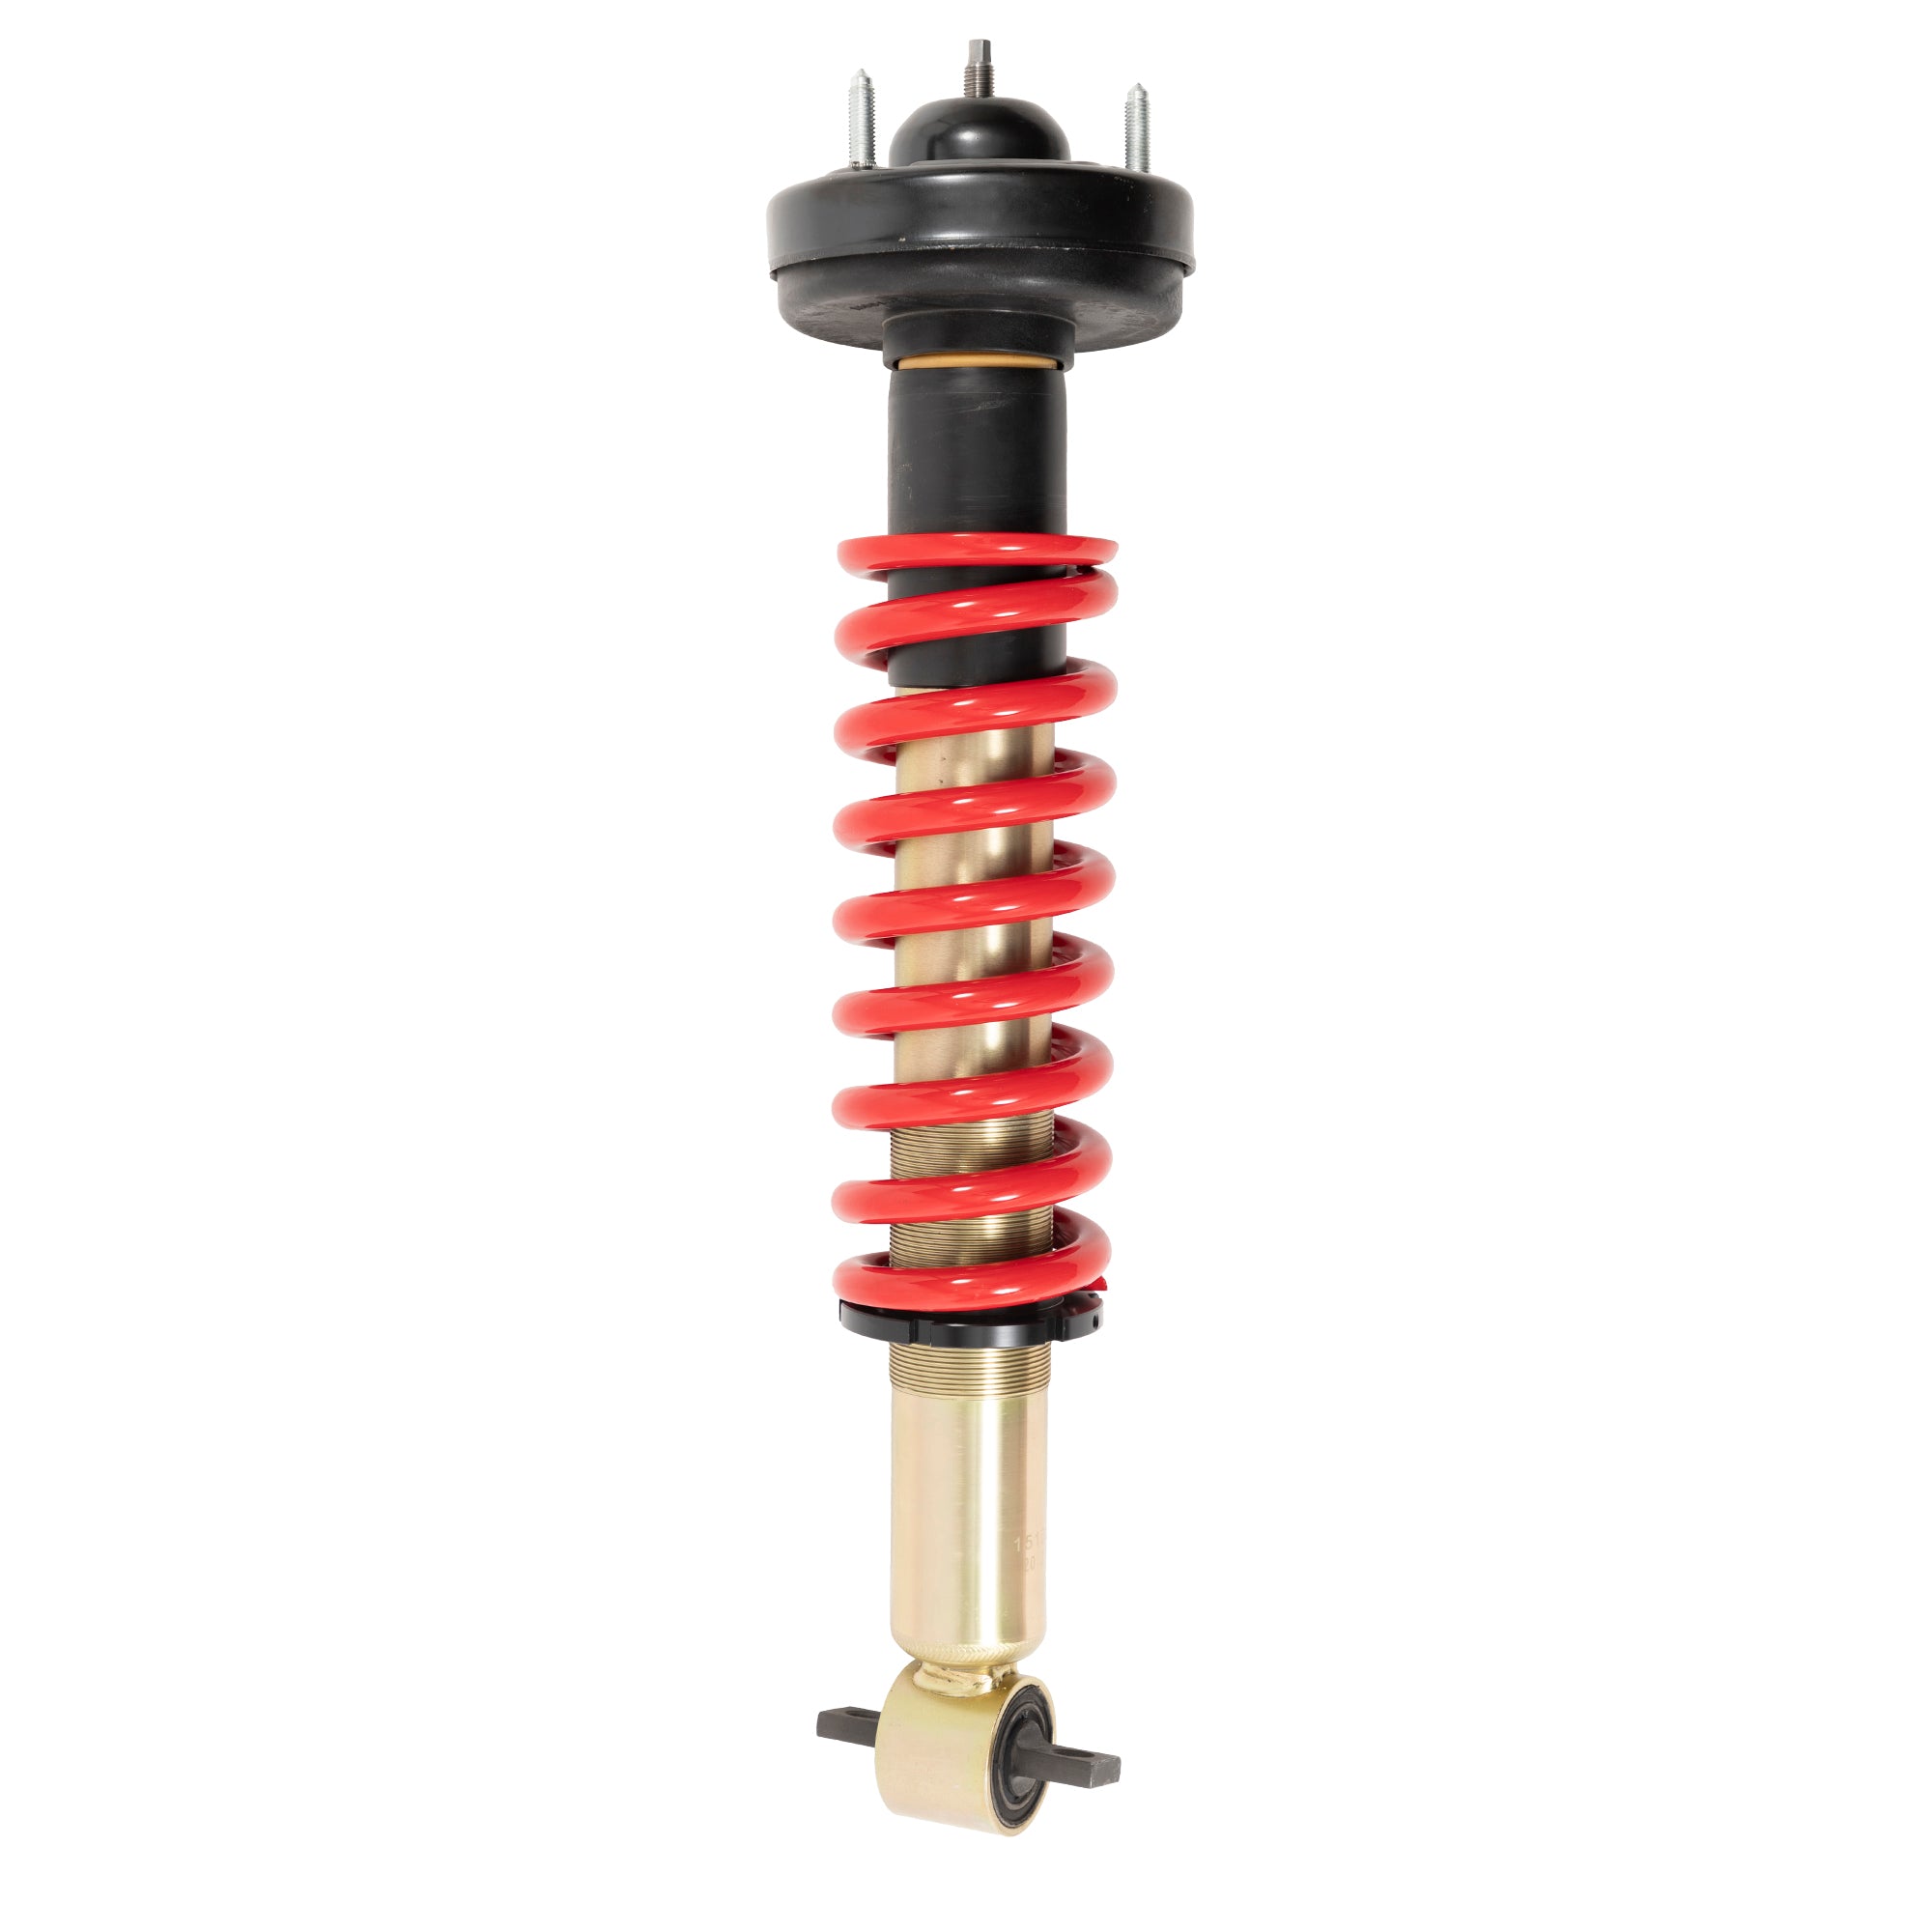 Factory Preset Fixed Damping, 0-3" Height Adjustable Level